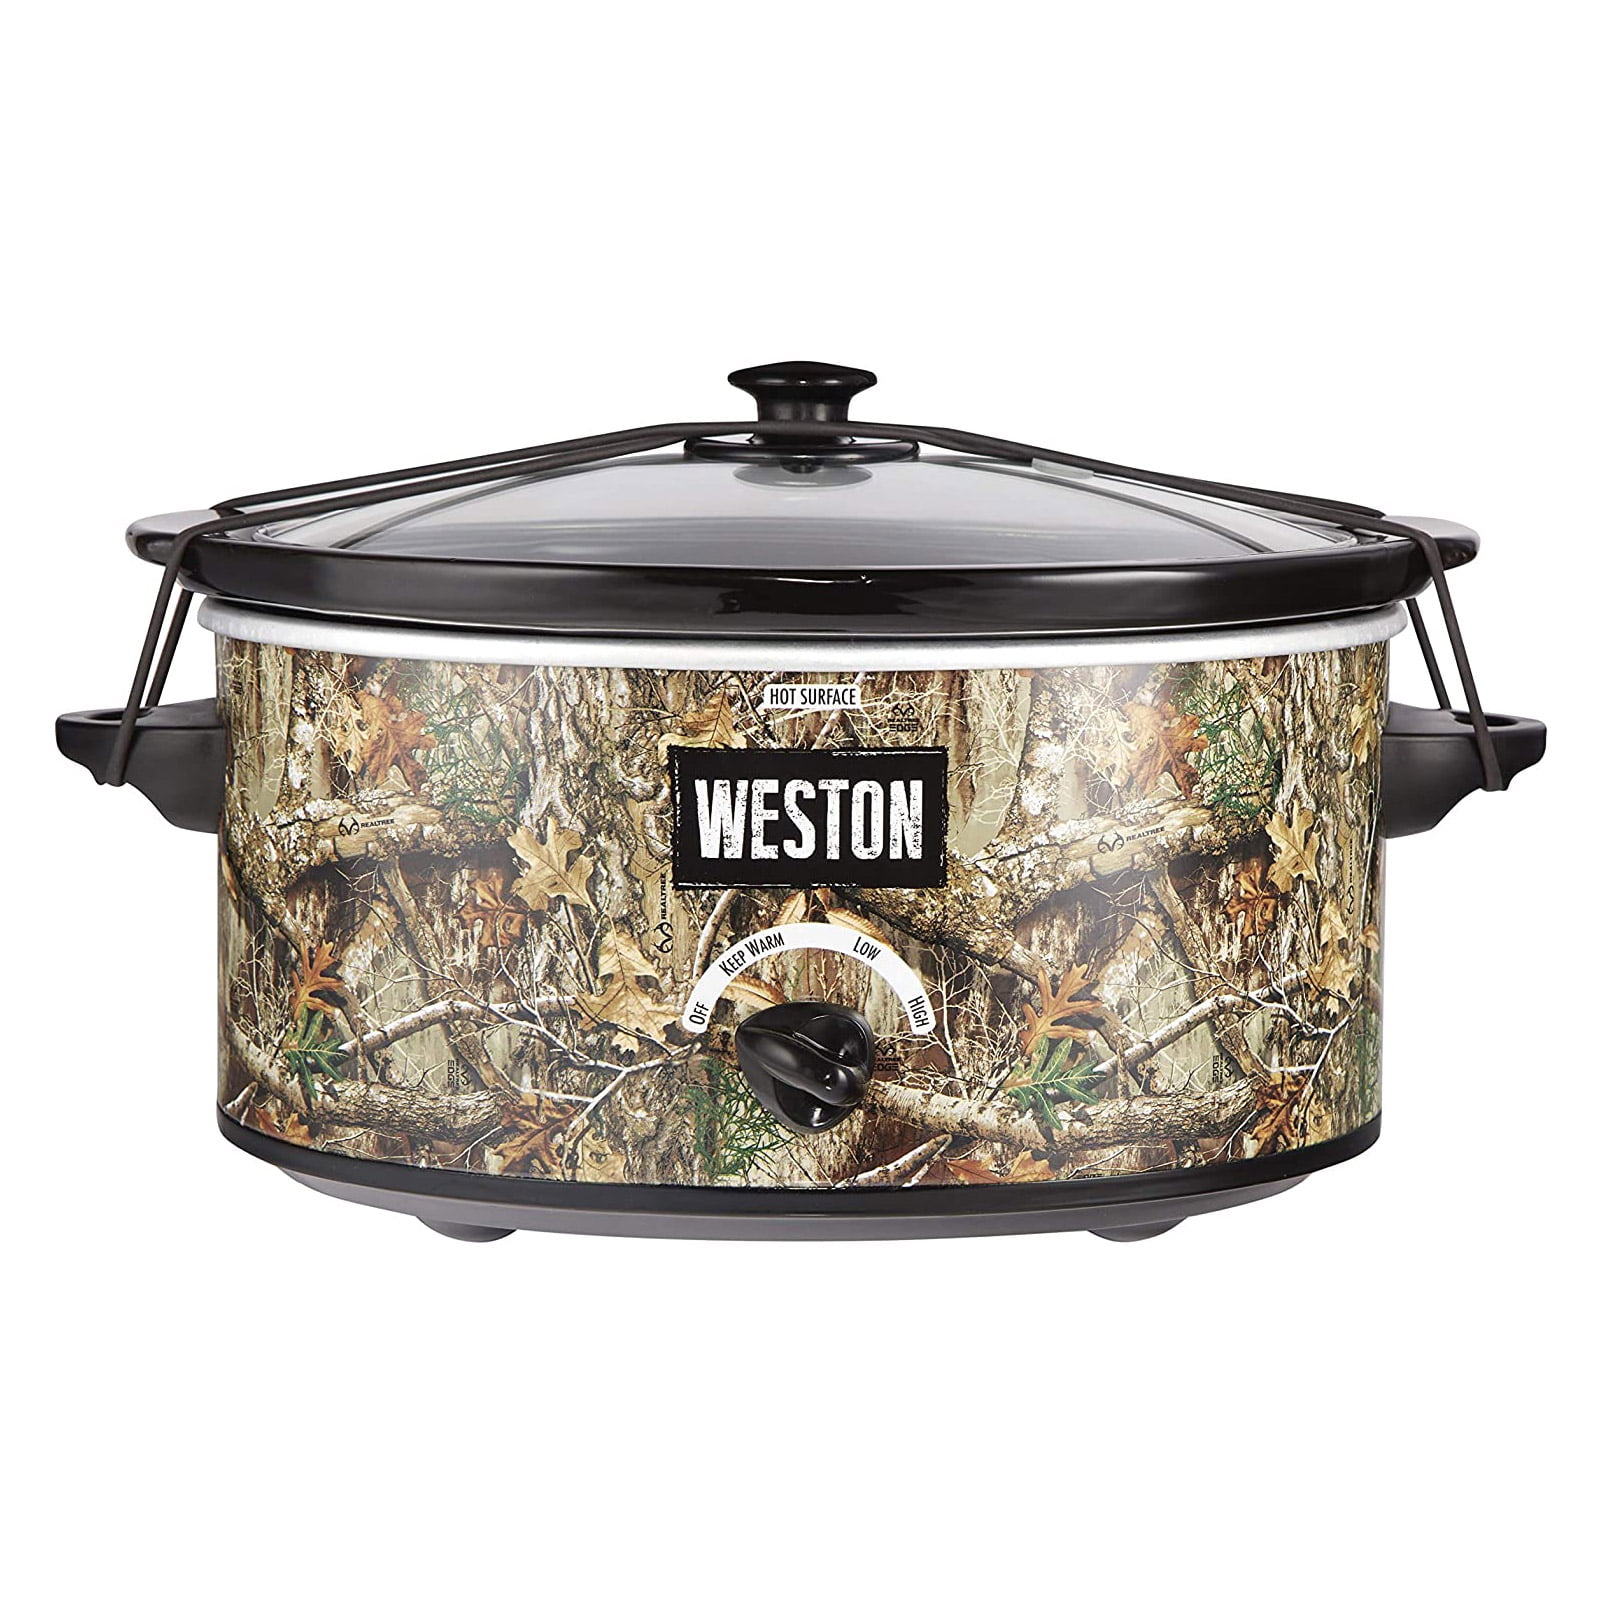 Realtree 5 Qt Slow Cooker with Lid Latch Strap - Bed Bath & Beyond -  21680862